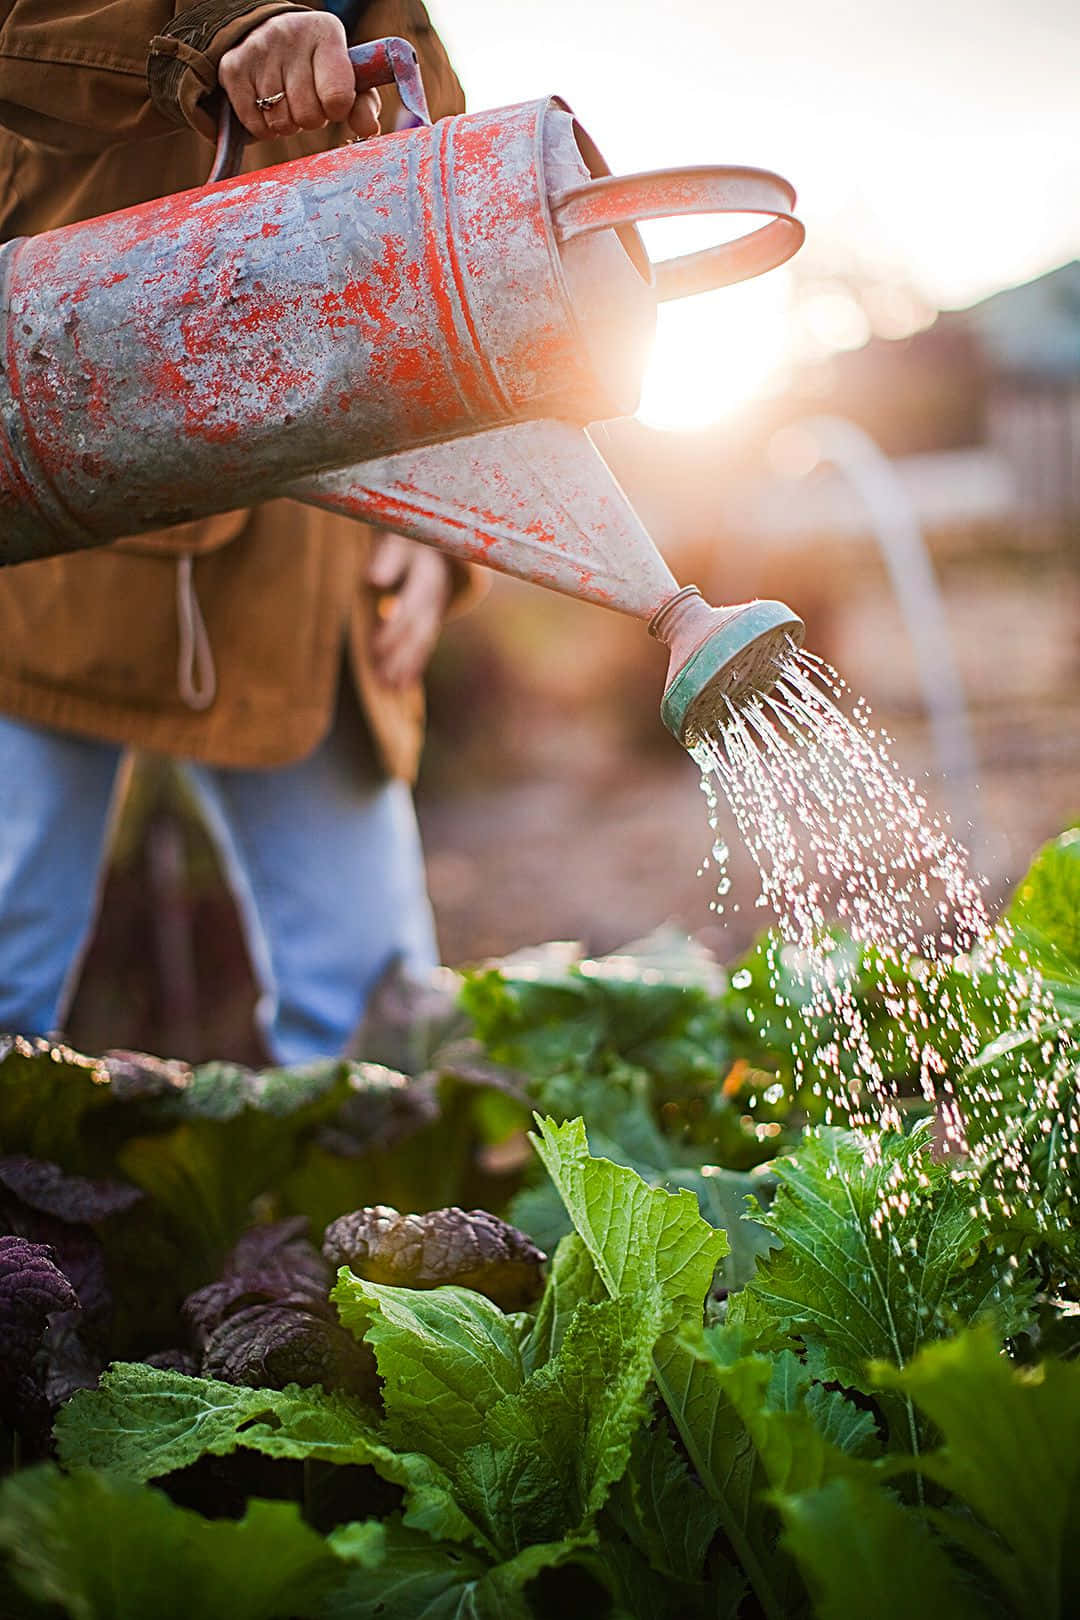 Get your garden ready for spring with these helpful tips!